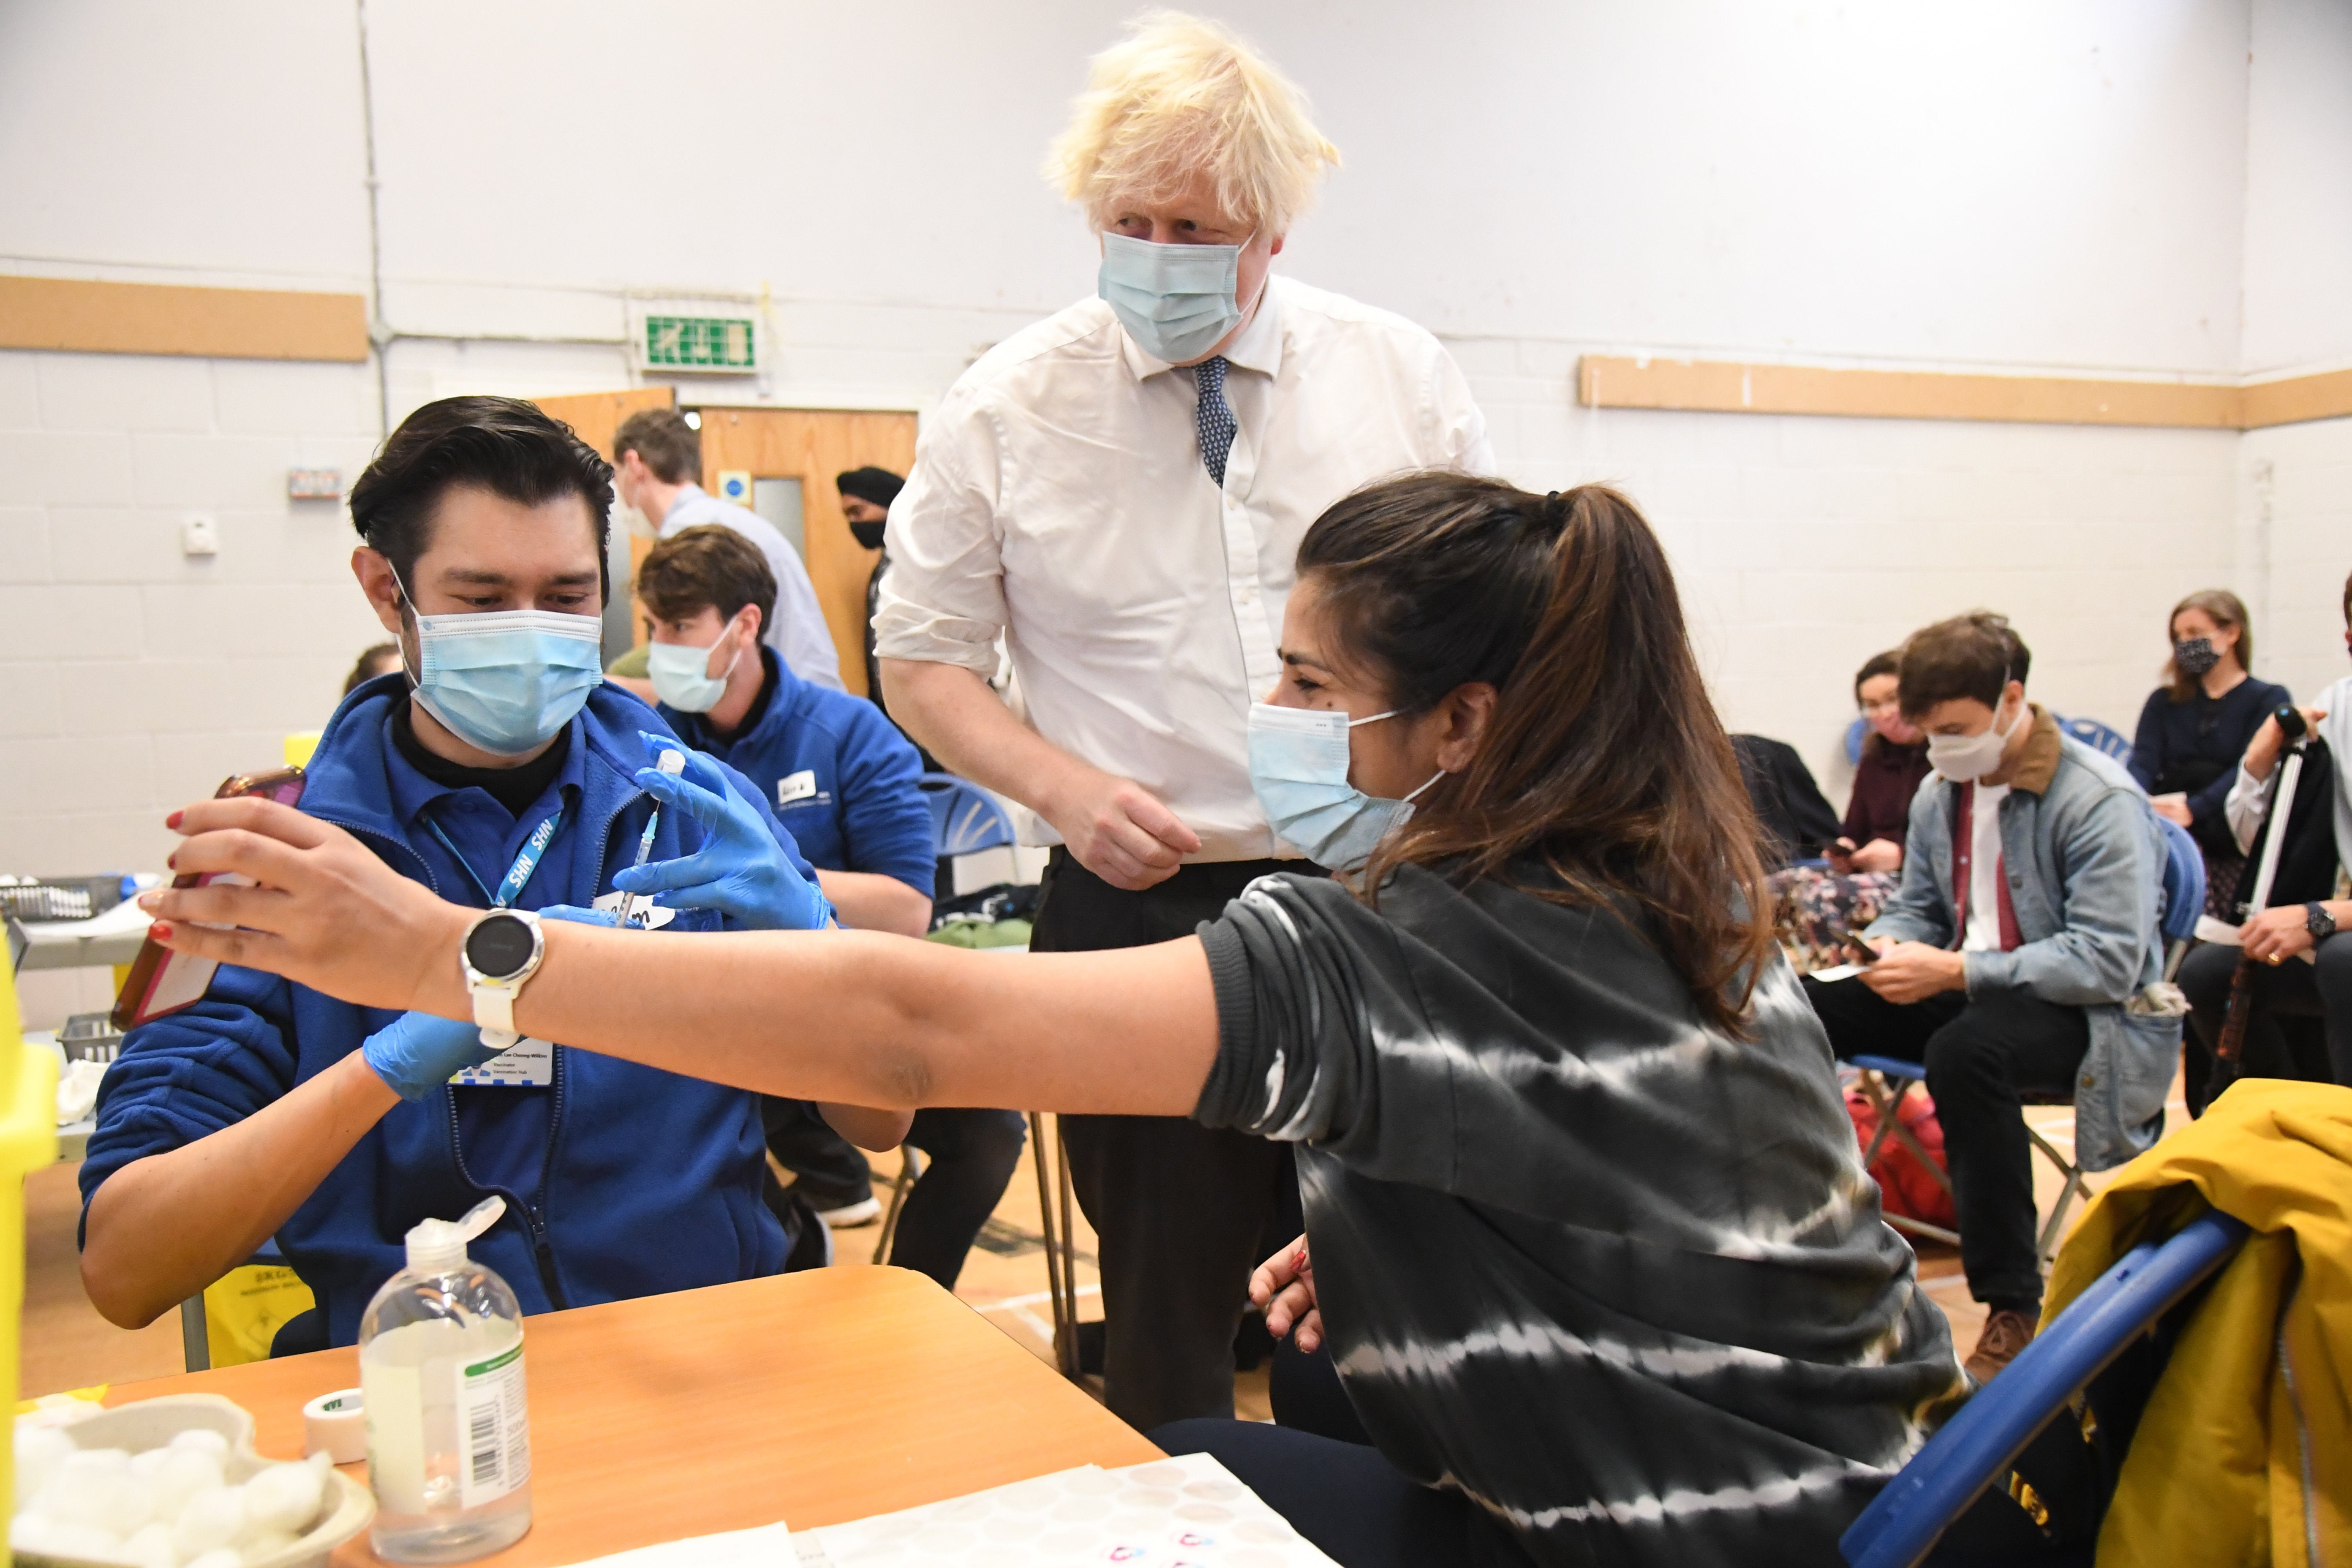 Boris Johnson during a visit to the Stow Health vaccination centre in Westminster (Jeremy Selwyn/Evening Standard/PA)